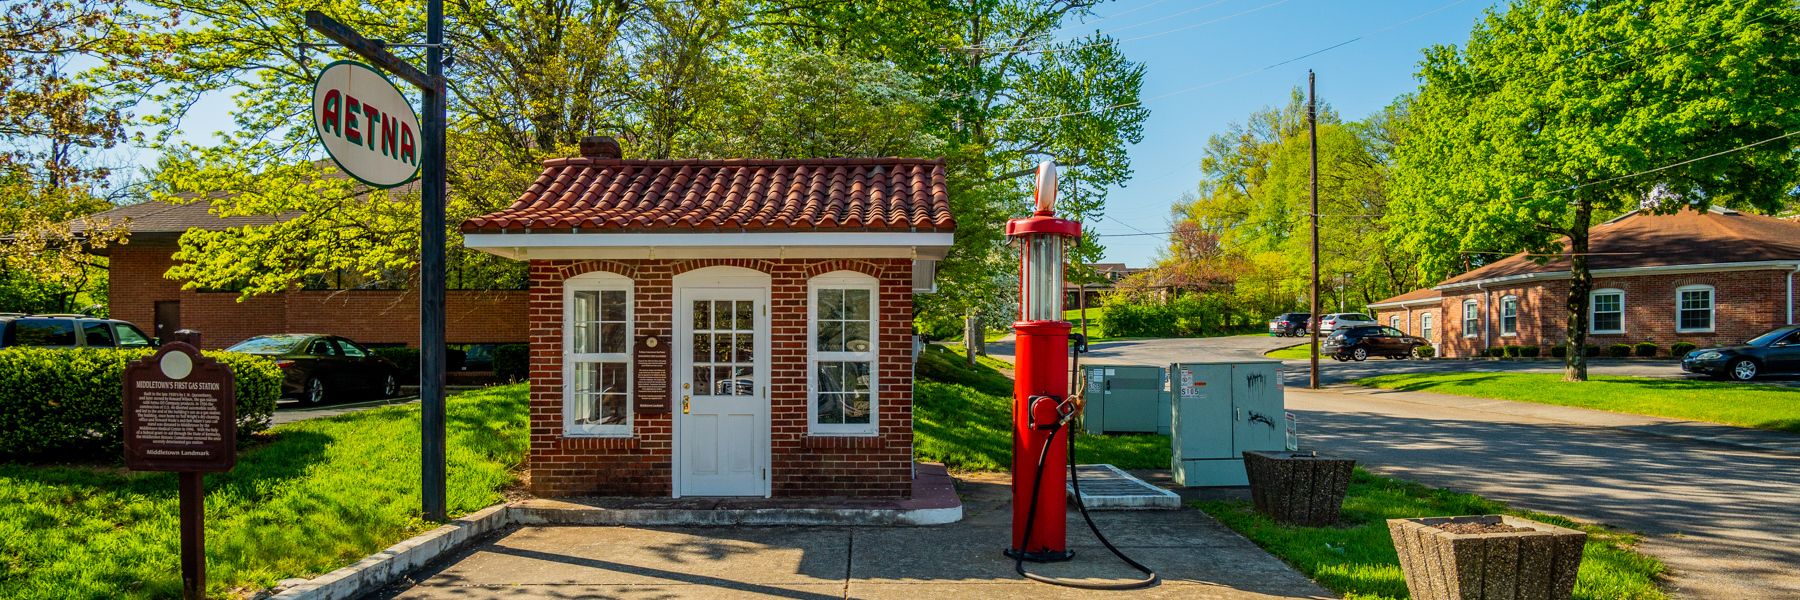 Middletown historic gas station